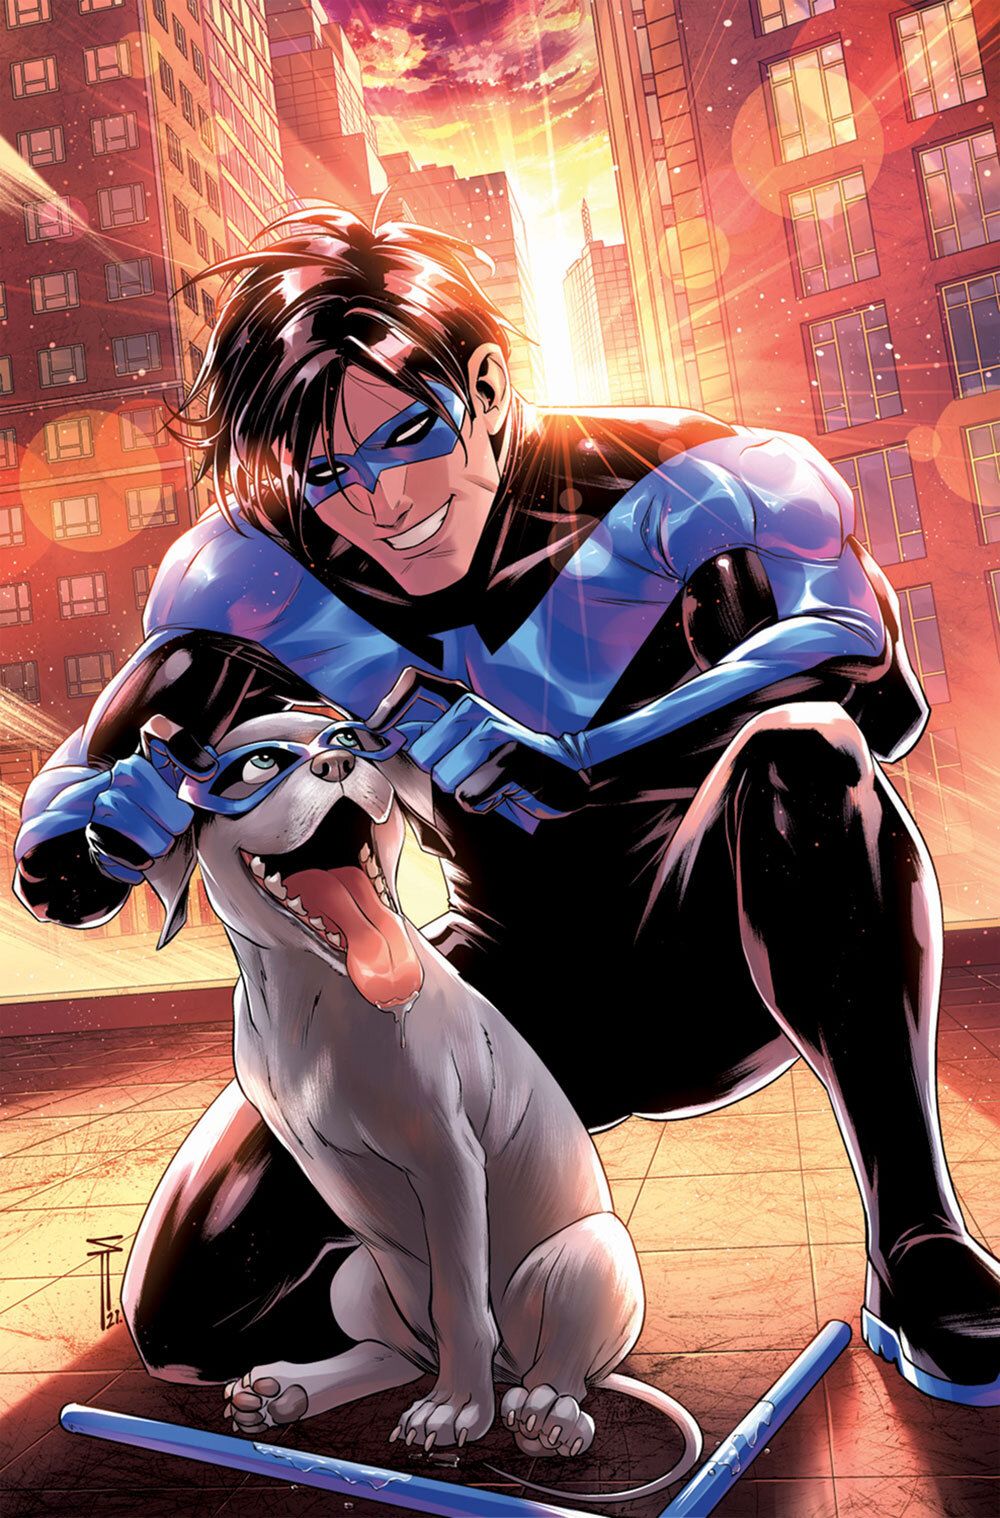 Nightwing S New Partner Bitewing Gets Her First Costume On An Adorable Cover